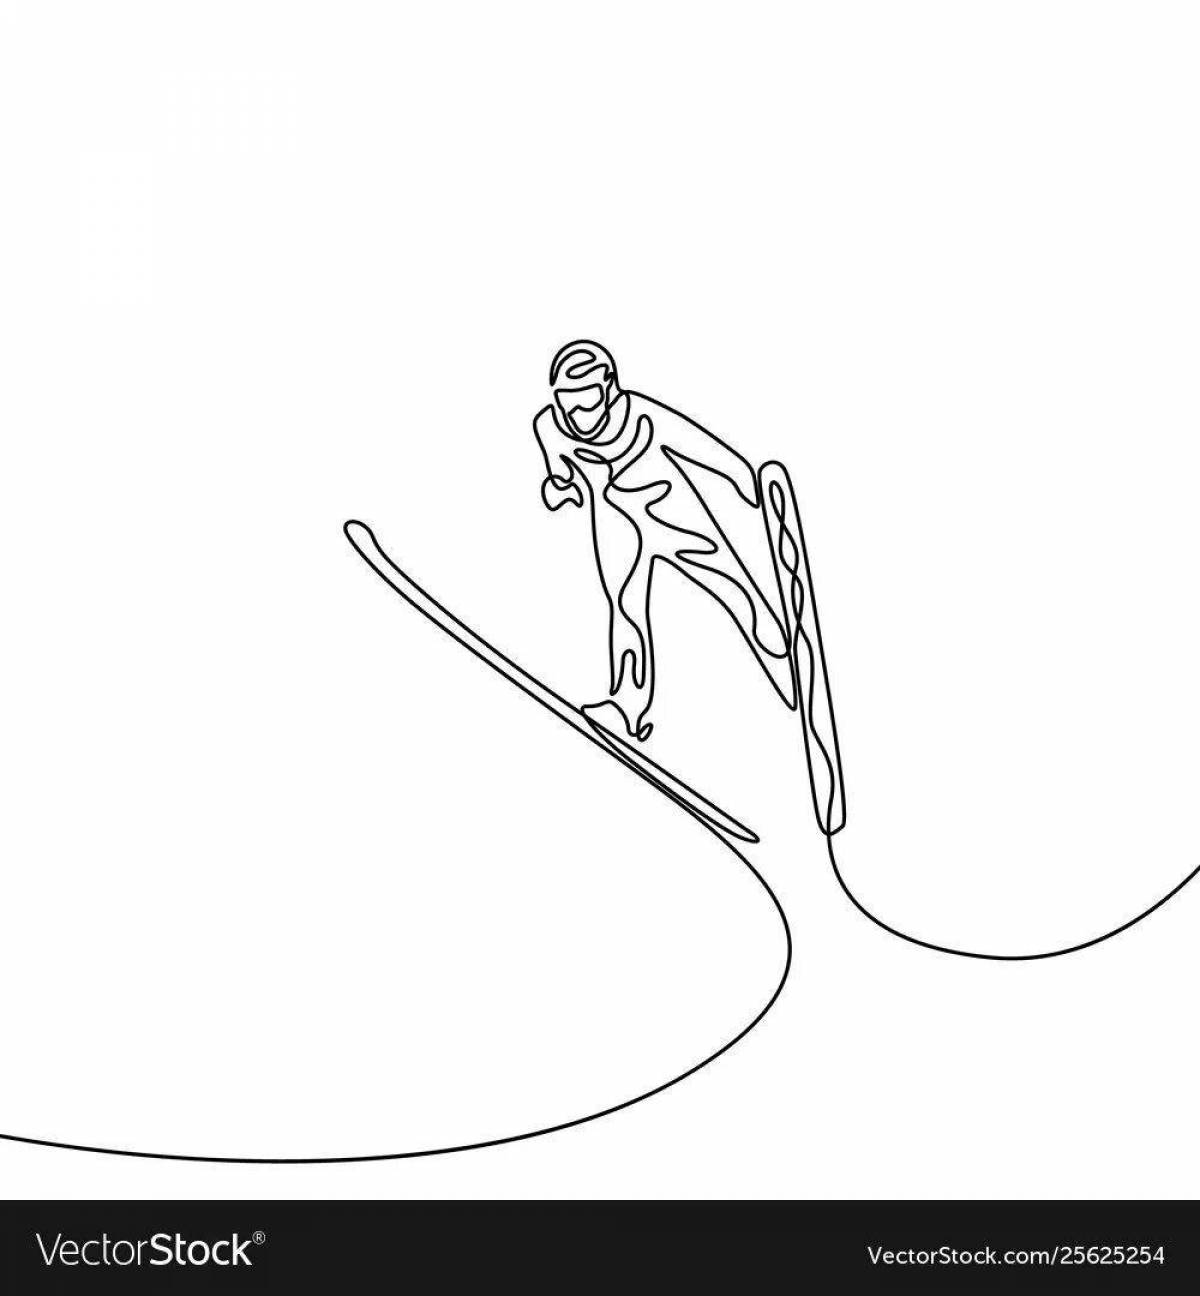 Colorful ski jumping coloring page